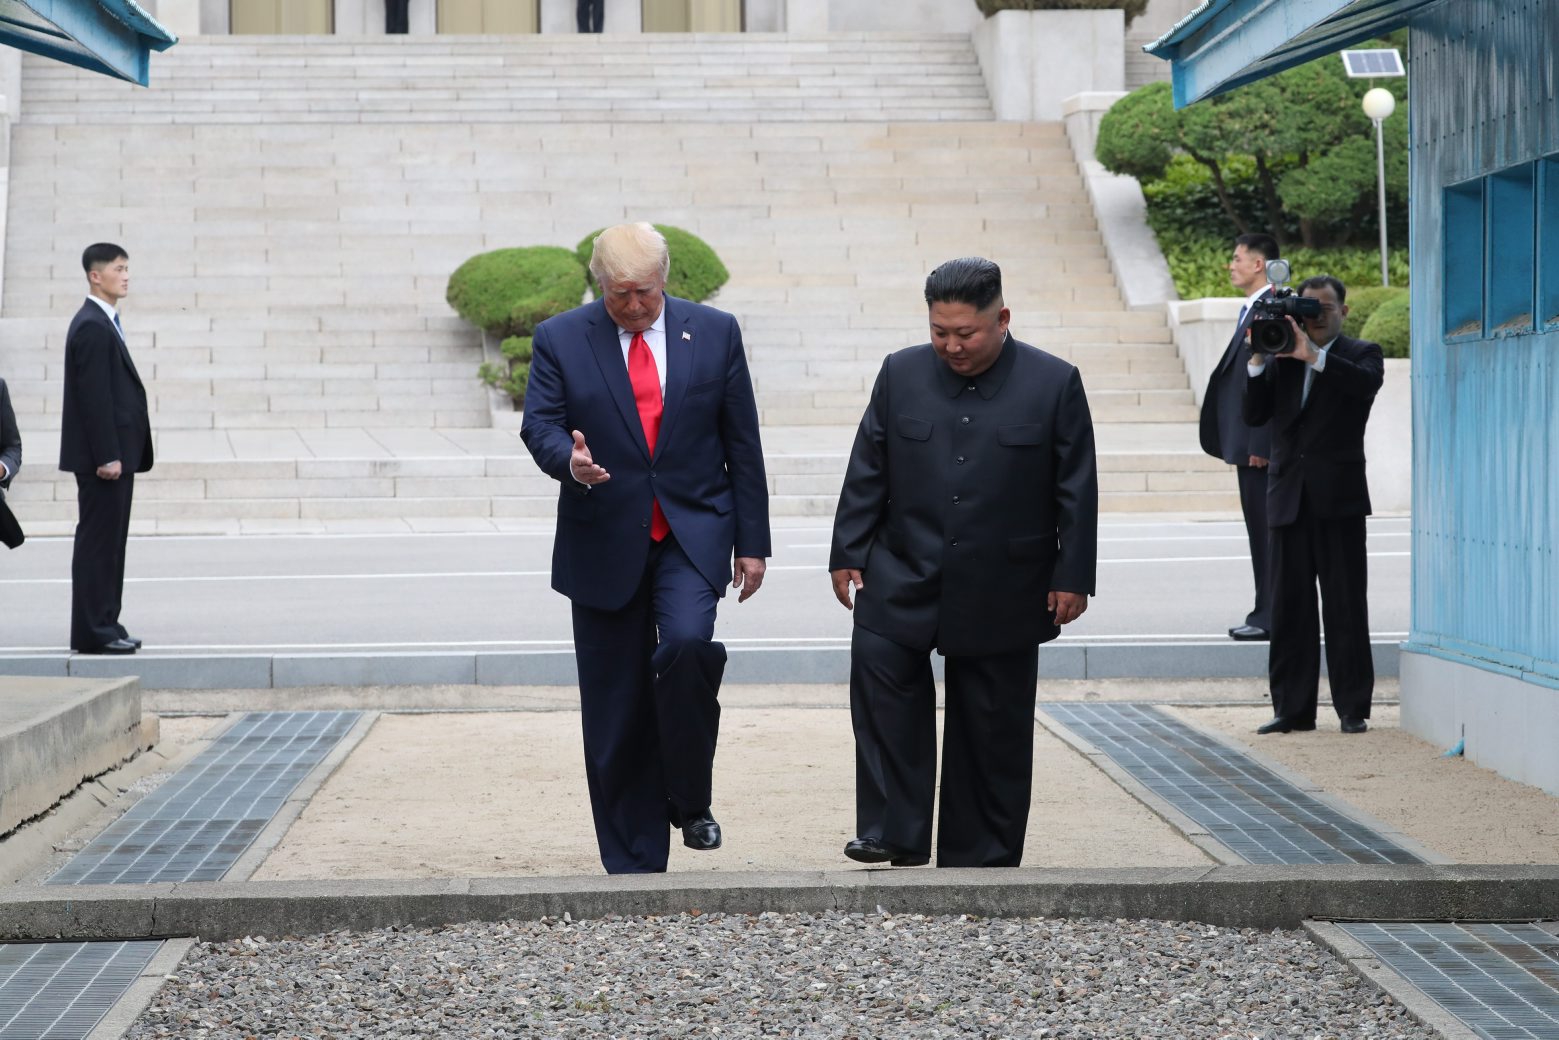 epa07683961 US President Donald J. Trump (L) with North Korean leader Kim Jong-un cross the Military Demarcation Line into the southern side of the truce village of Panmunjom in the Demilitarized Zone, which separates the two Koreas, 30 June 2019. The US leader arrived in South Korean on 29 June for a two-day visit that will include a meeting with South Korean President Moon Jae-in and a trip to the Demilitarized Zone.  EPA/YONHAP SOUTH KOREA OUT SOUTH KOREA NORTH KOREA DIPLOMACY